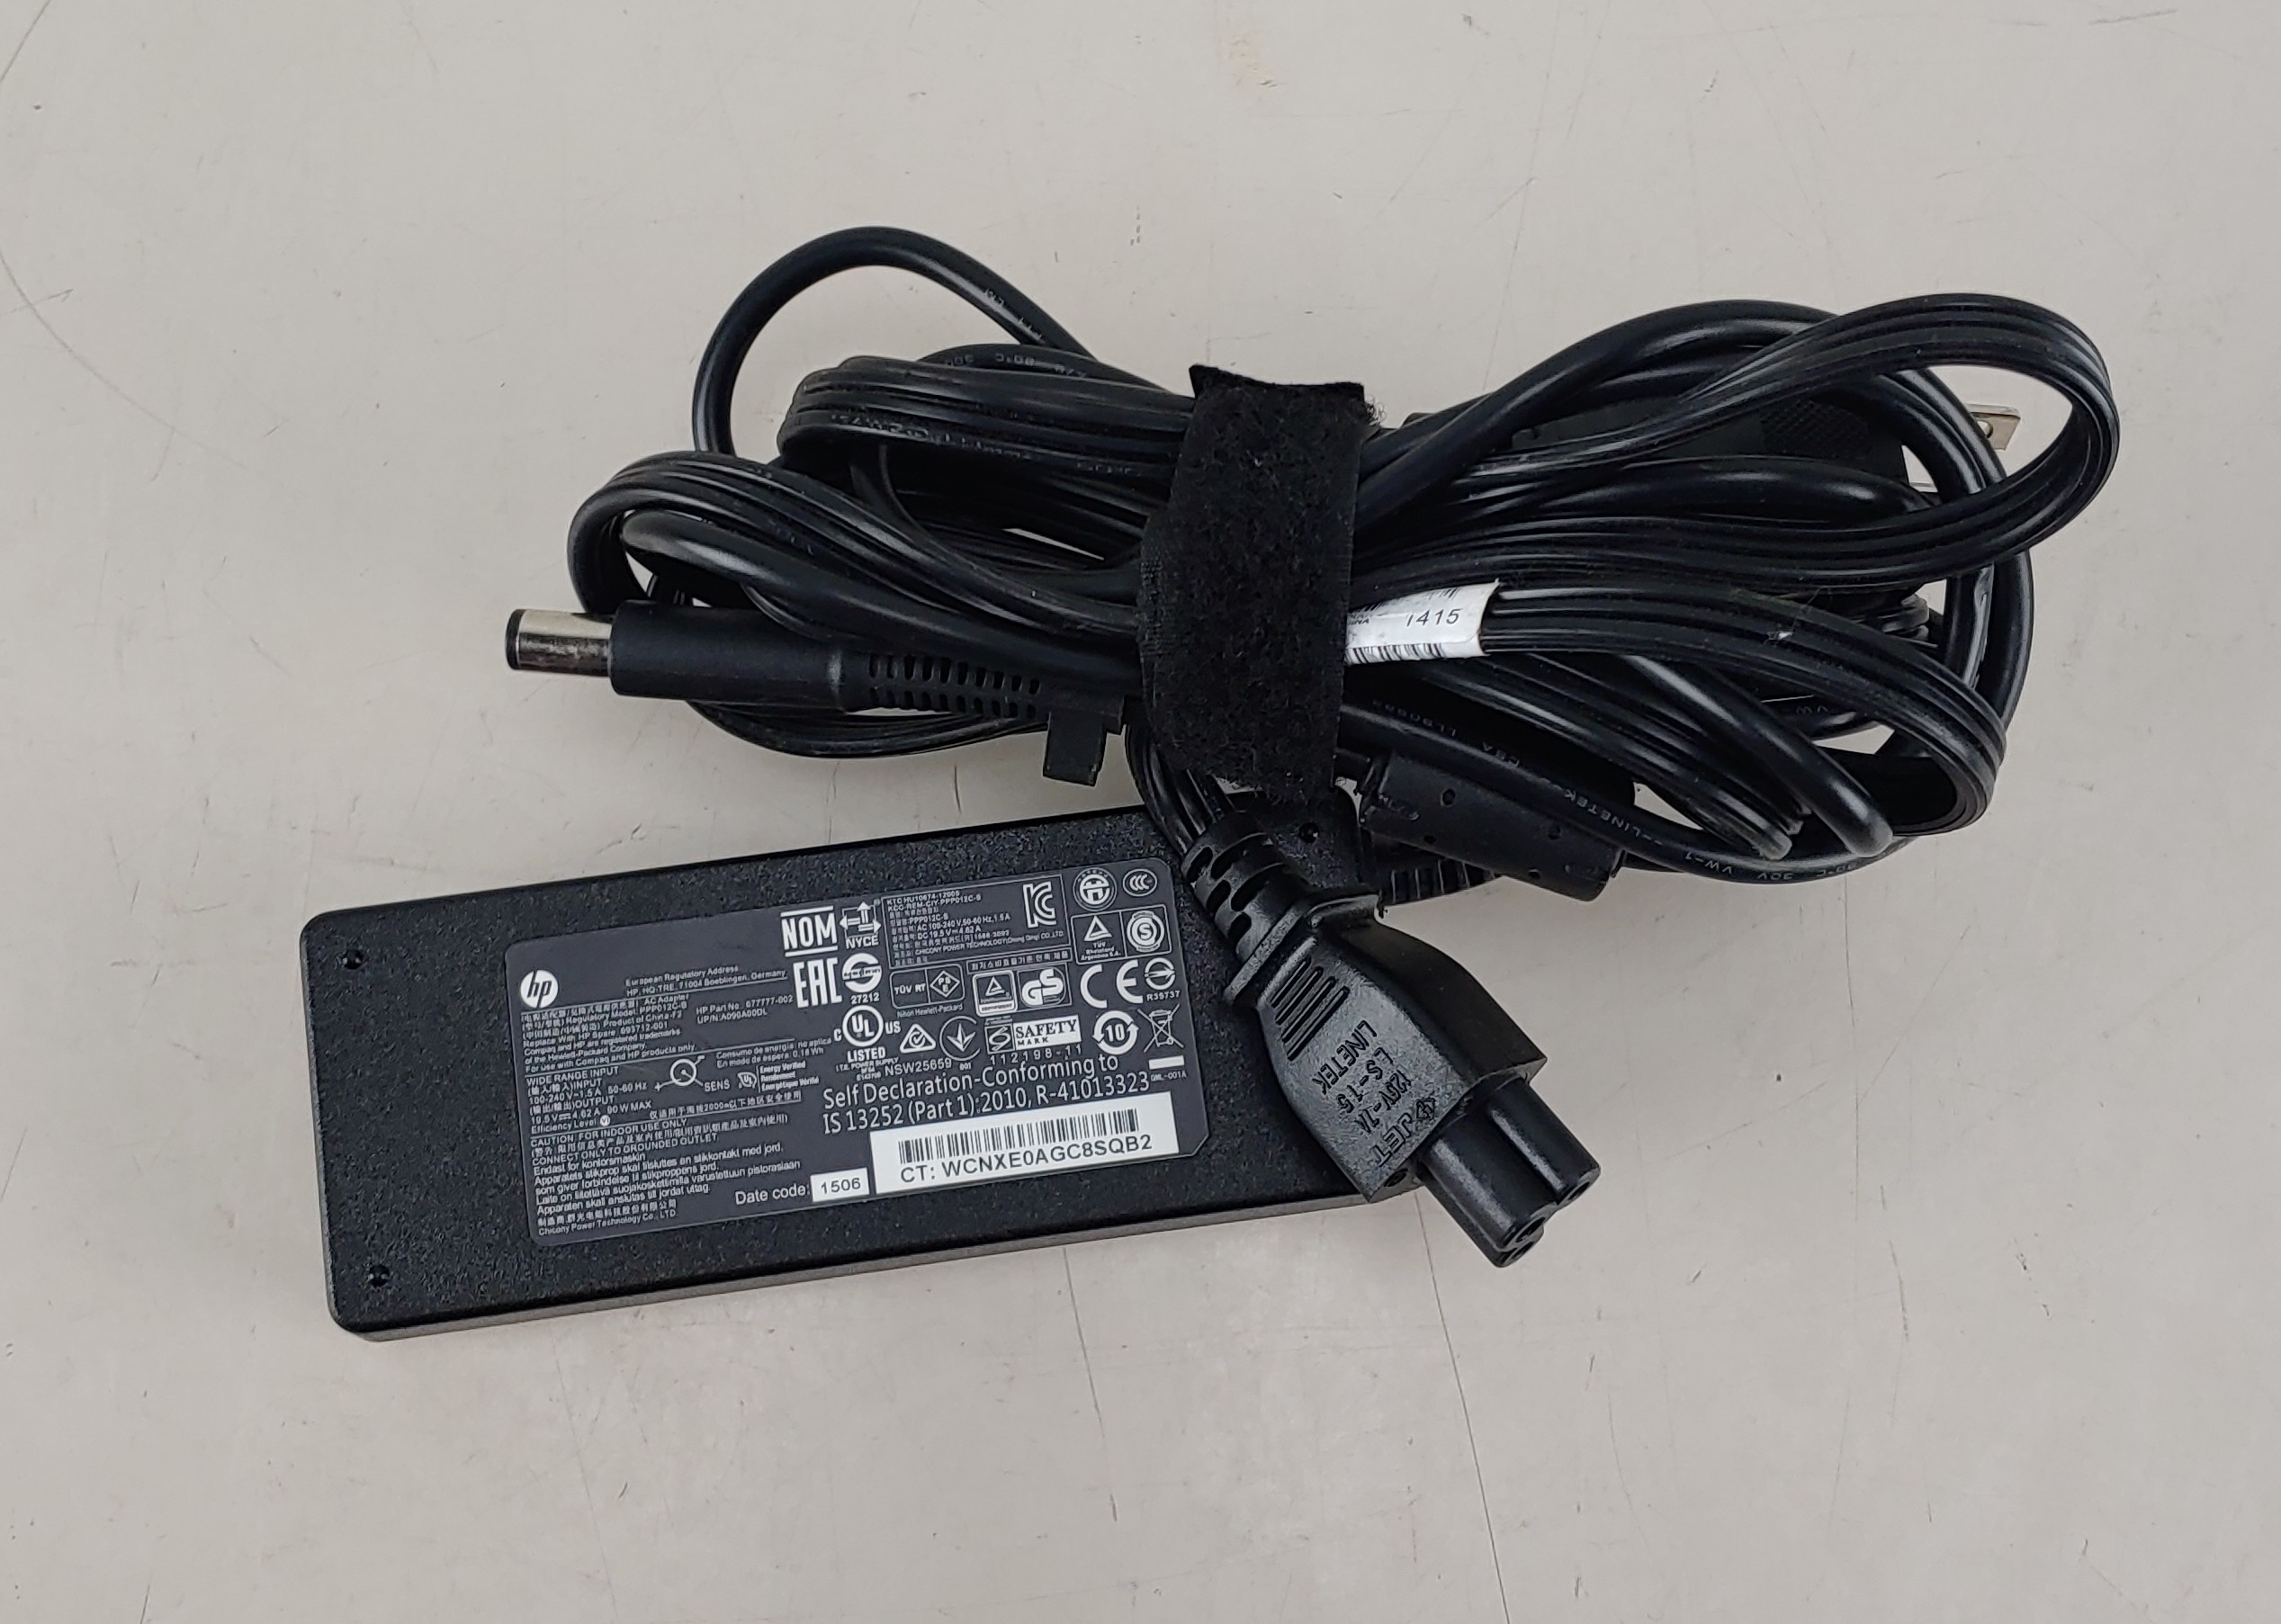 HP Laptop Charger Power Adapter 693712-001 677777-002 19.5V 4.62A